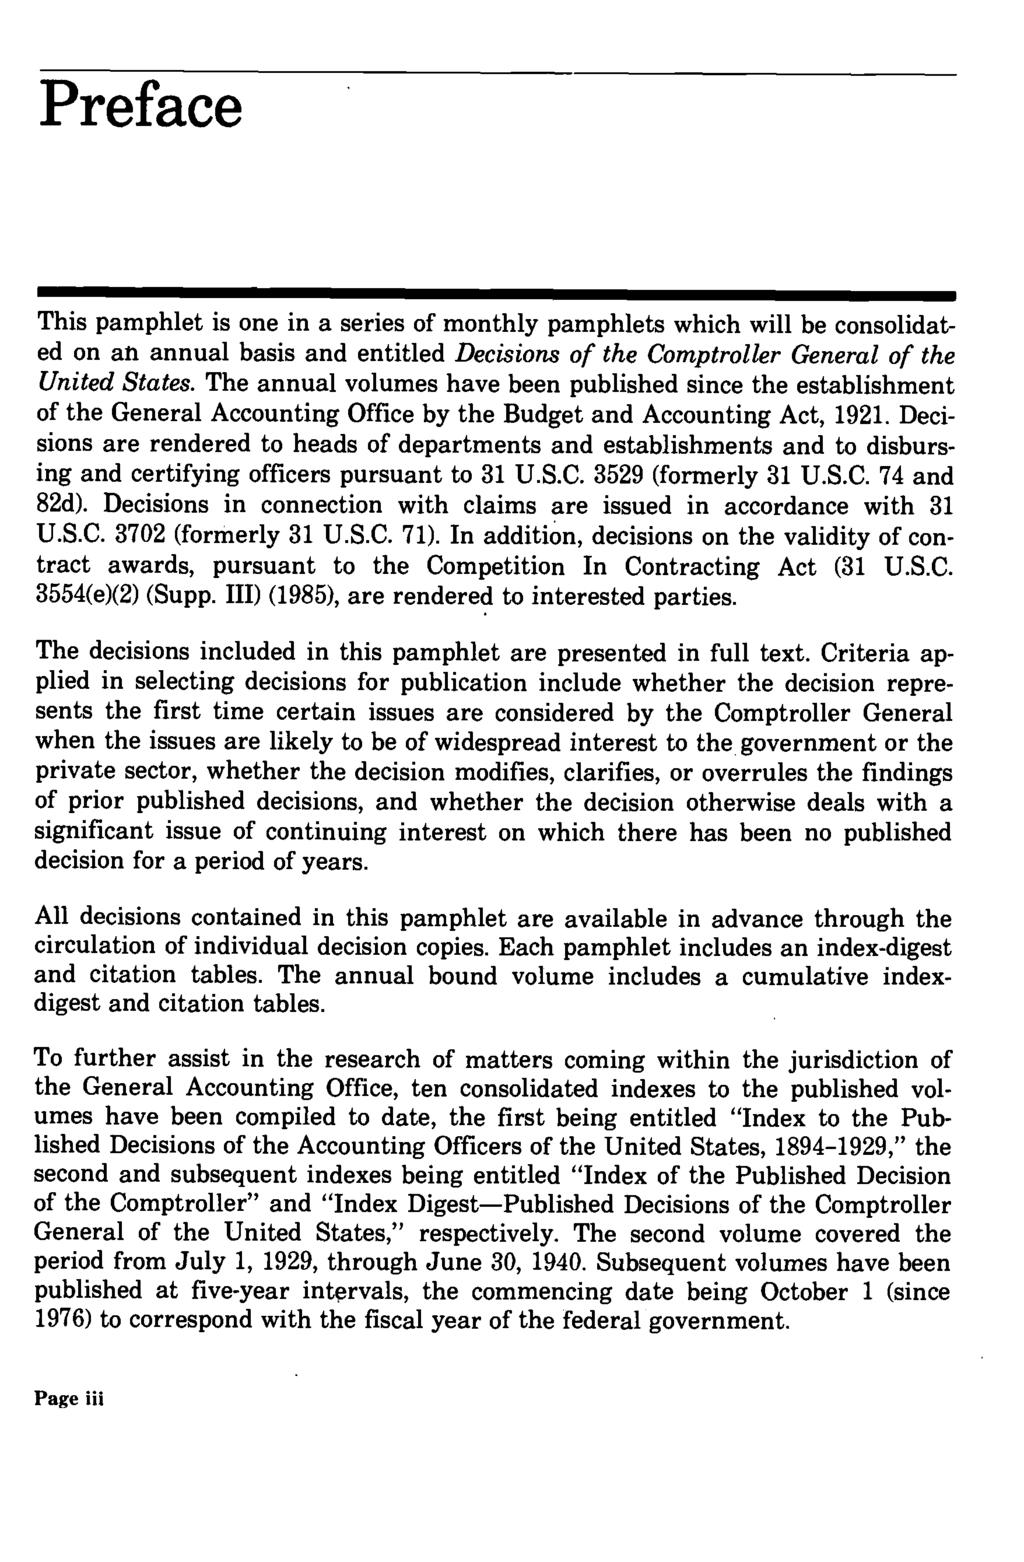 Preface This pamphlet is one in a series of monthly pamphlets which will be consolidated on an annual basis and entitled Decisions of the Comptroller General of the United States.